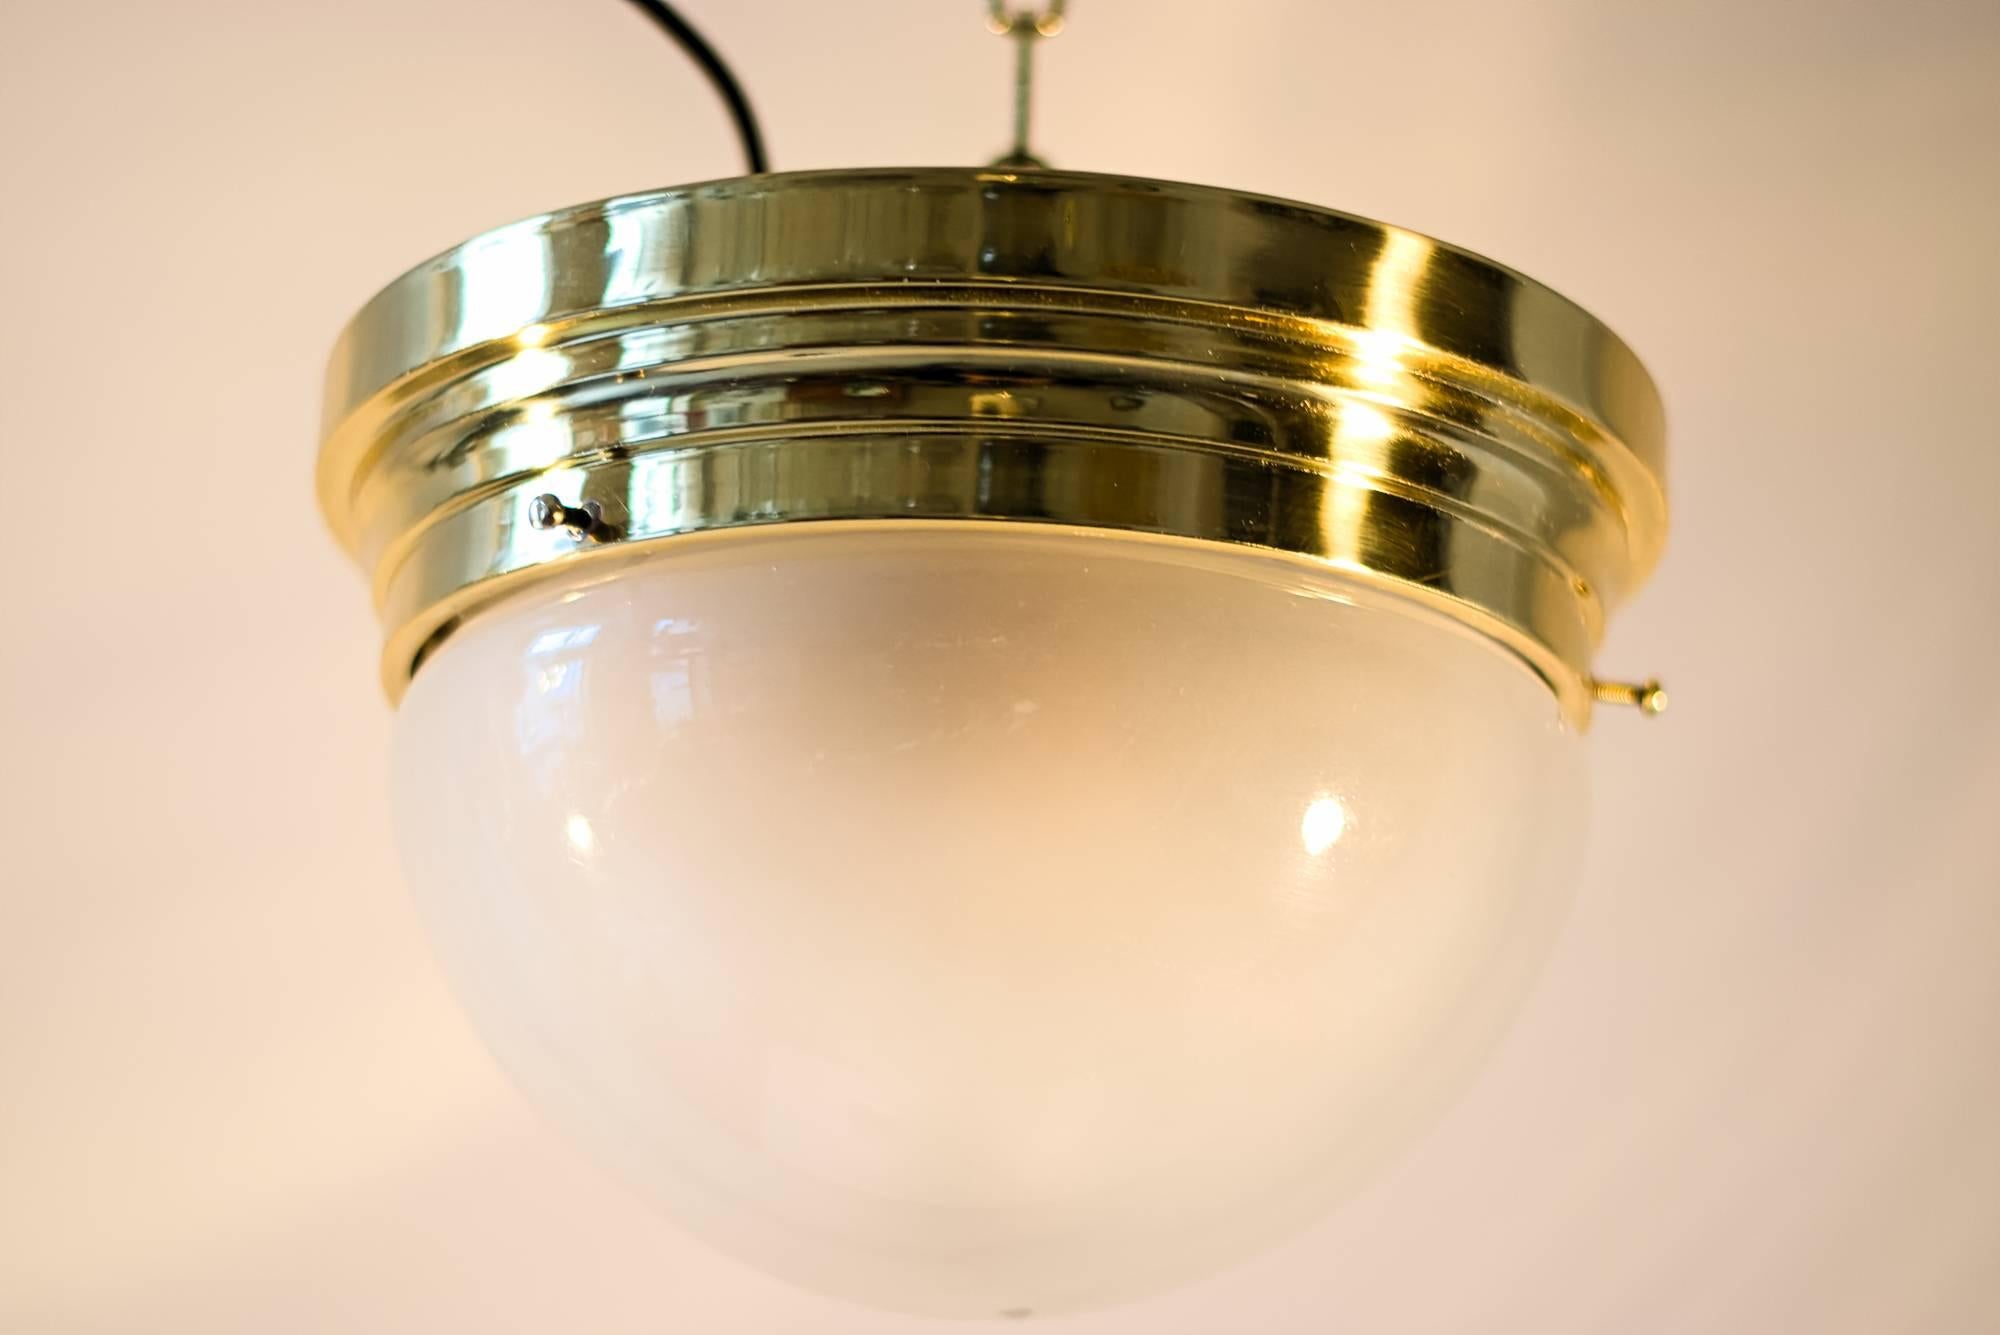 Art Deco ceiling lamp with original glass shade 
polished and stove enameled.